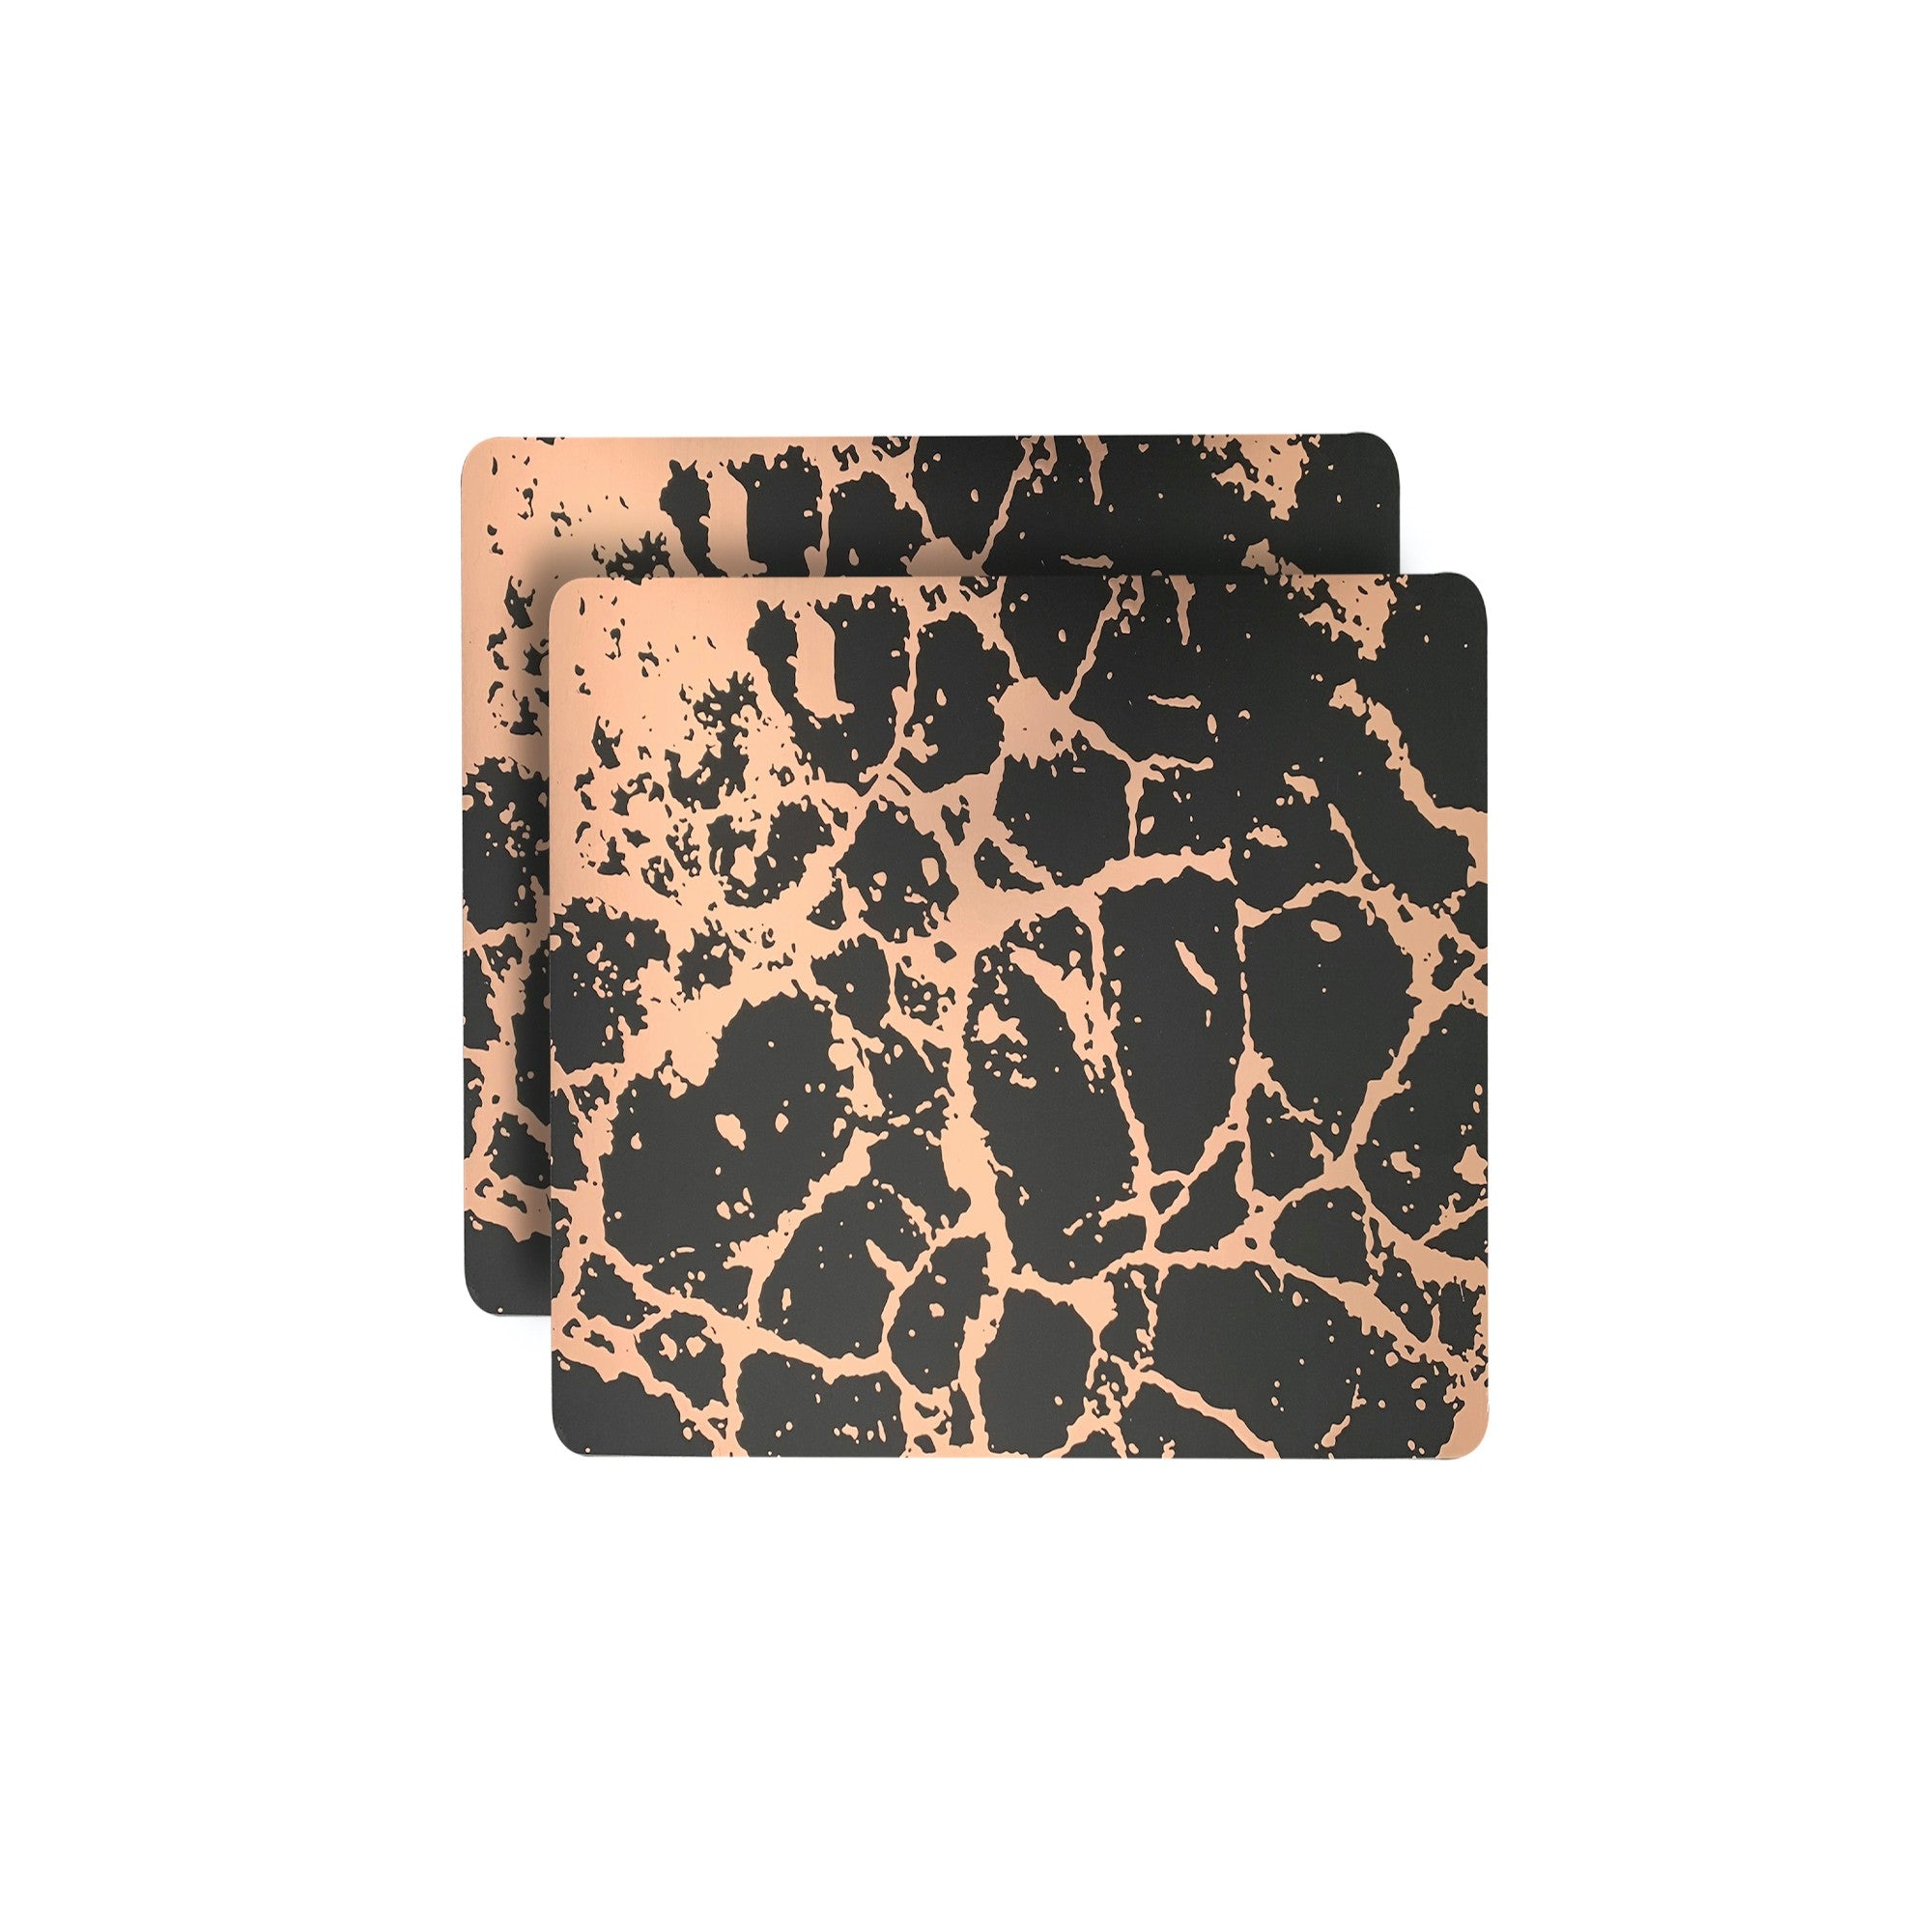 Dainty Home Marble Cork Foil Printed Marble Granite Designed Thick Cork Textured 15" x 15" Square Placemats